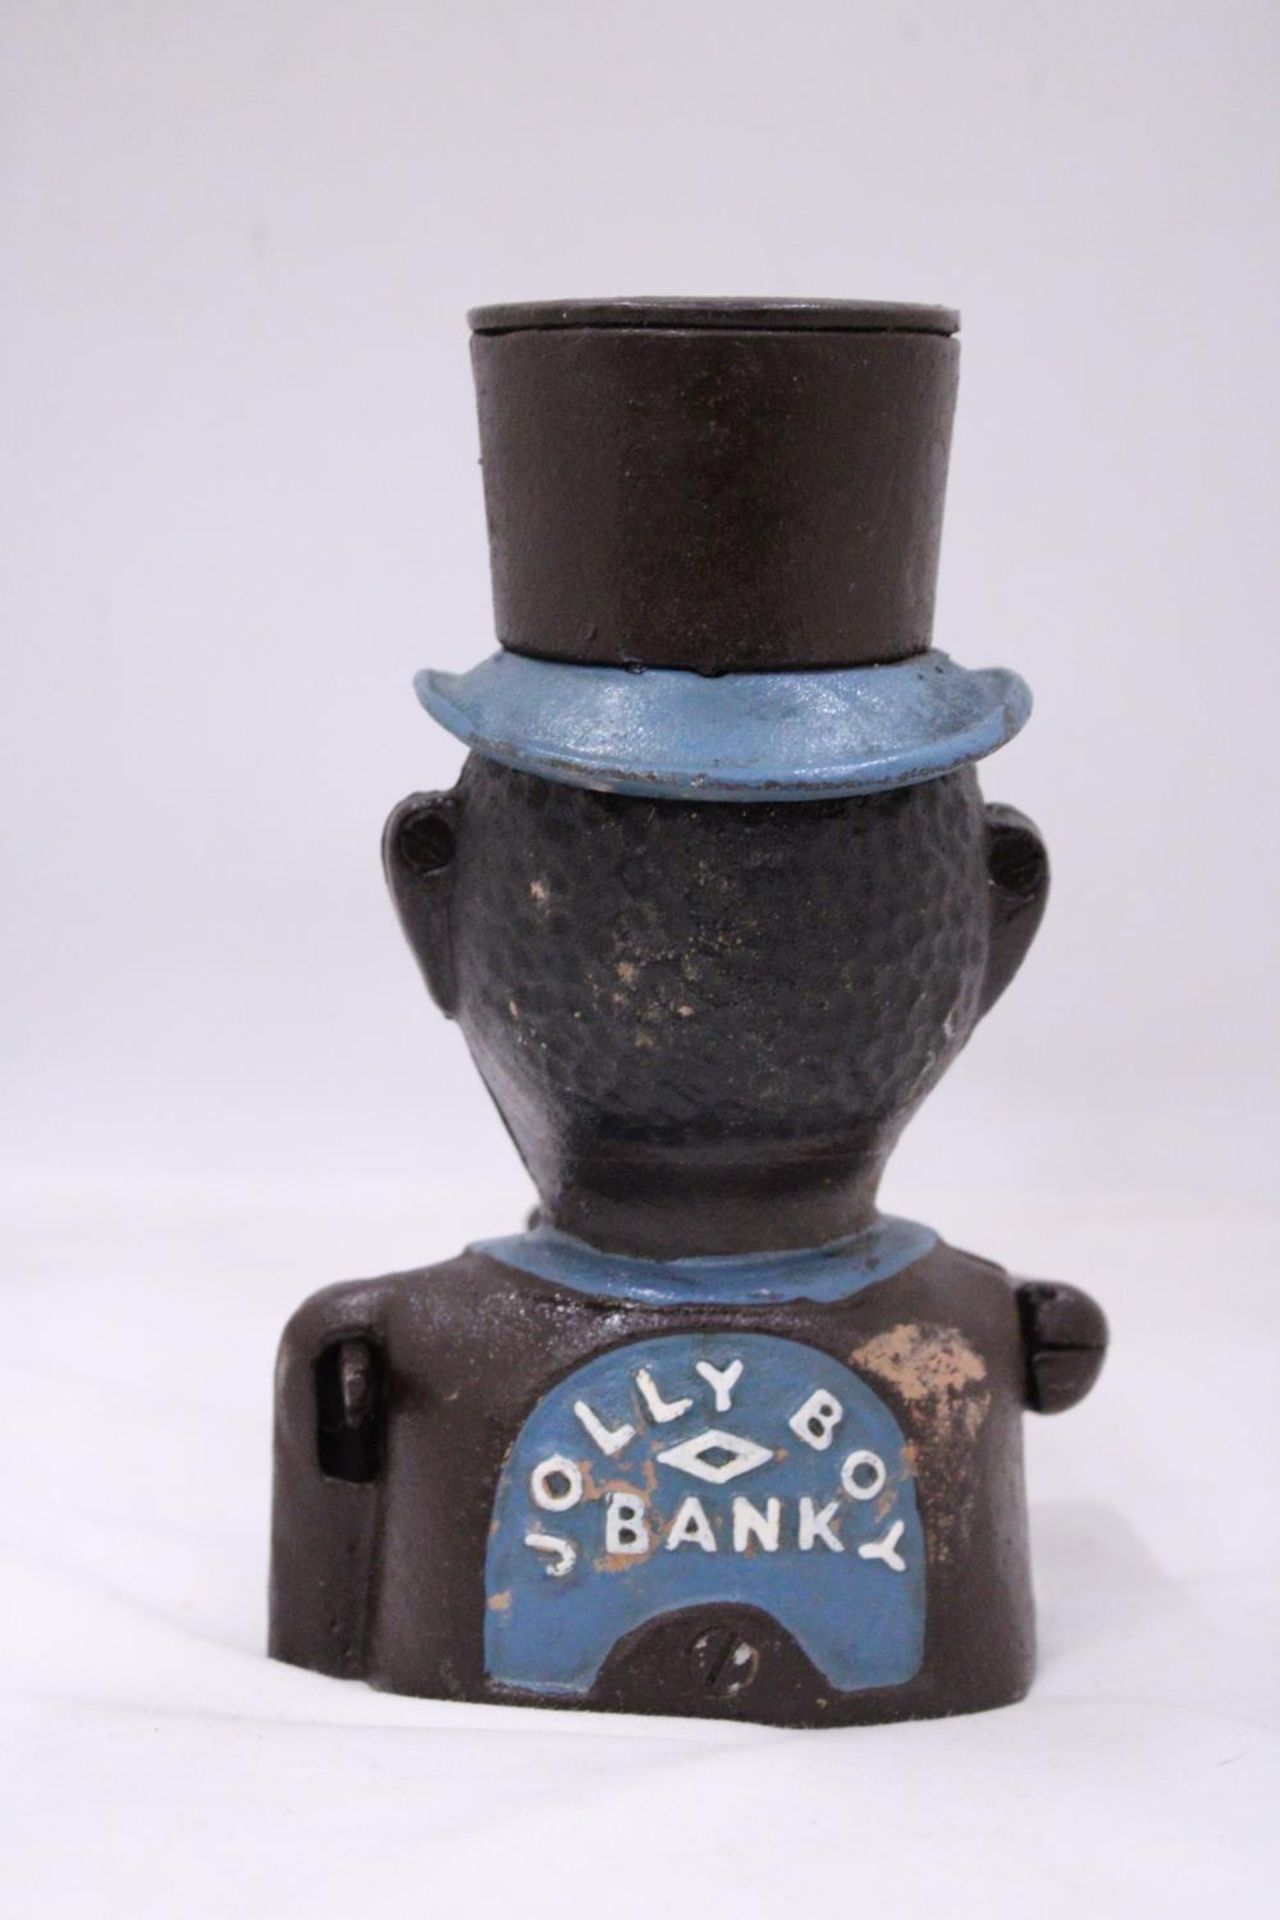 A VINTAGE CAST IRON AFRICAN AMERICAN IN TOP HAT - Image 3 of 4